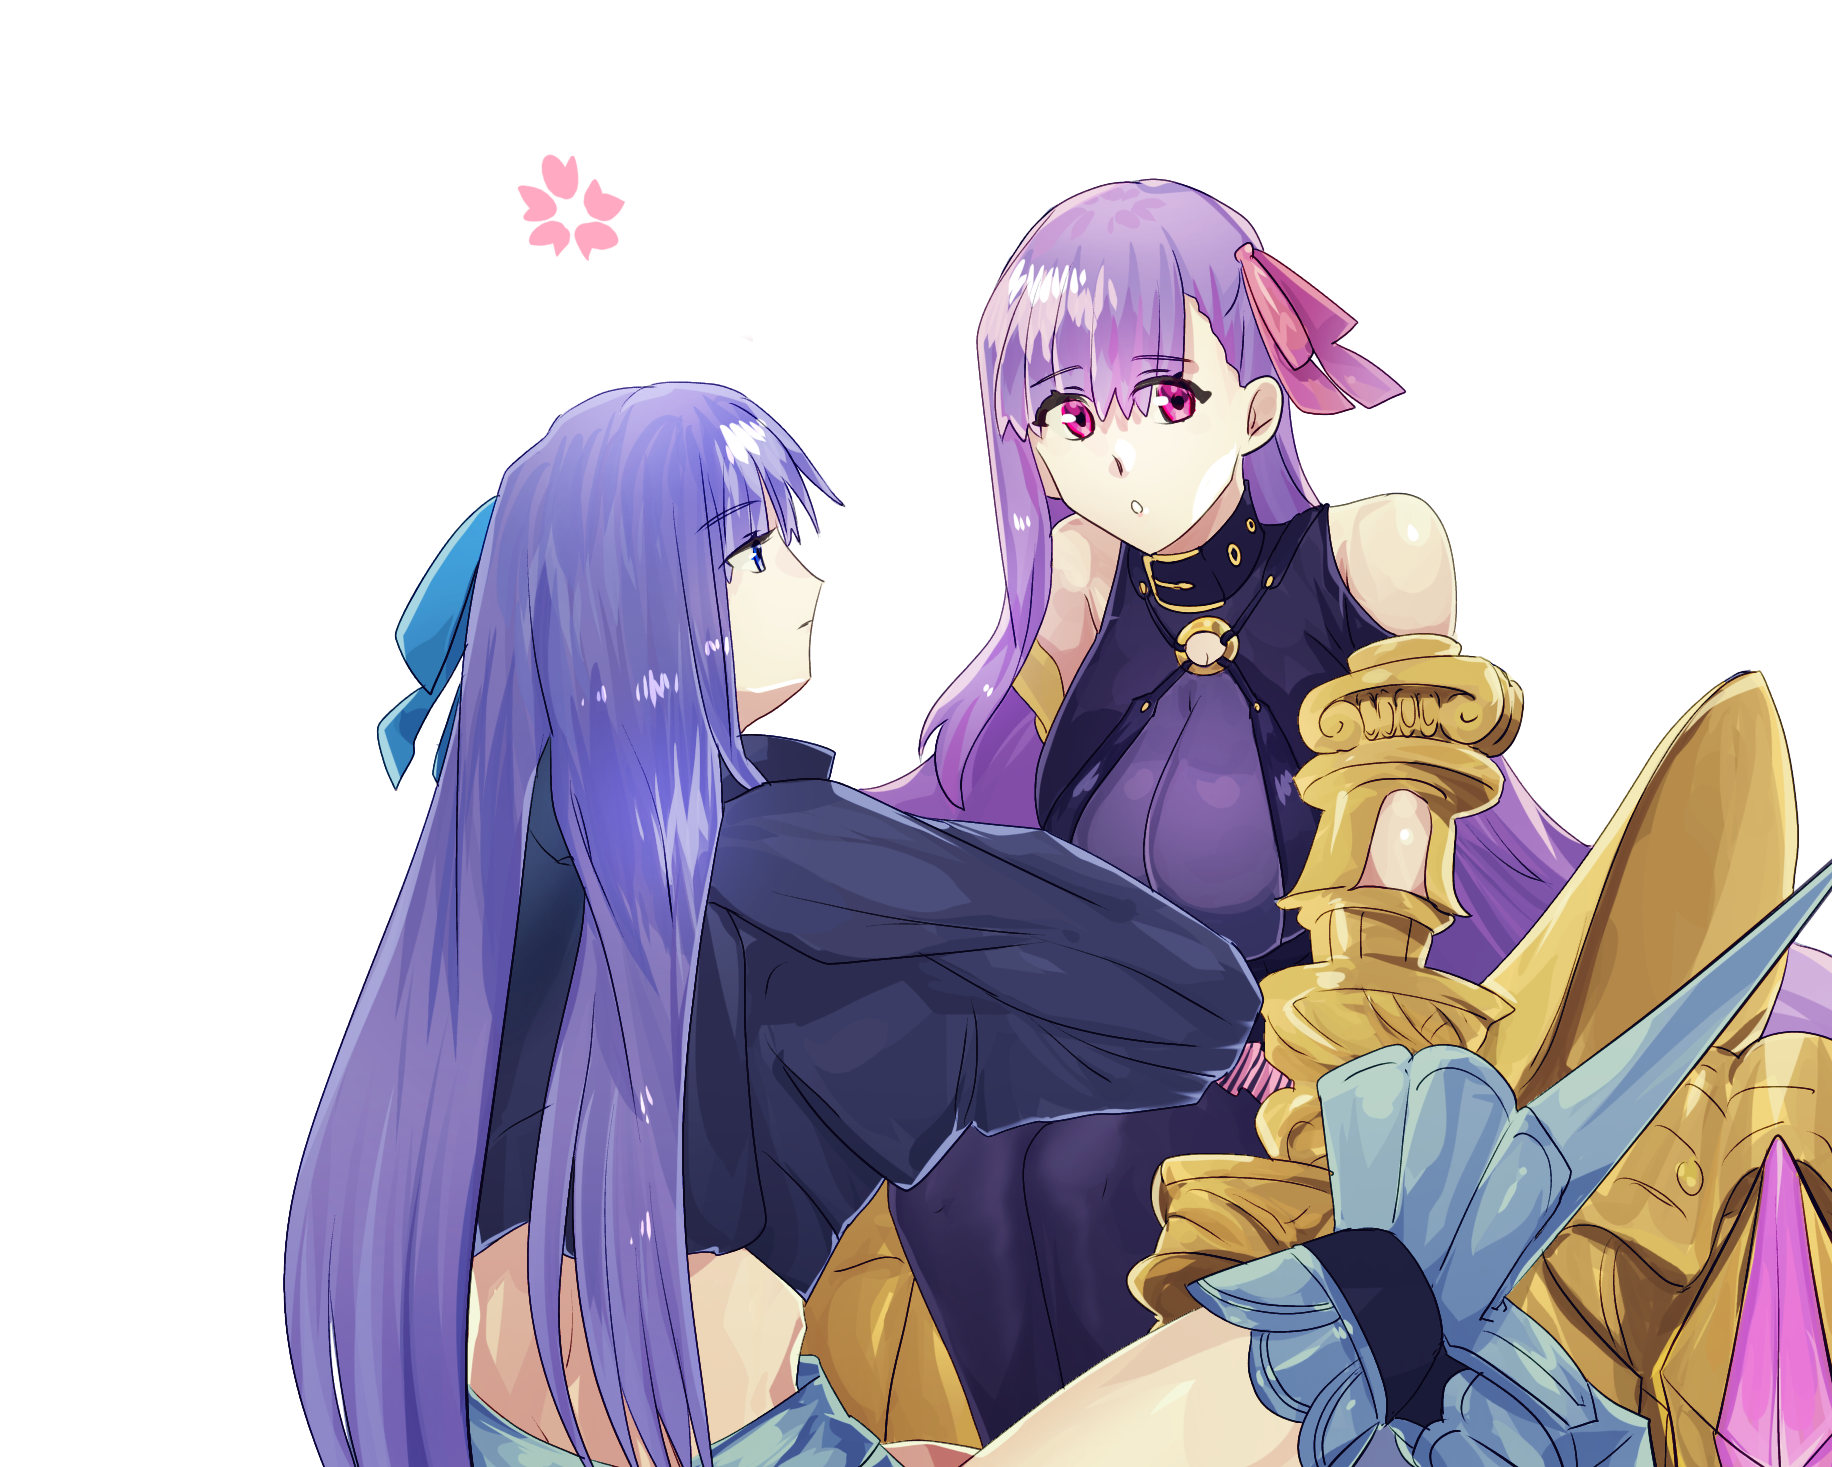 Anime 1832x1467 anime anime girls Fate series Fate/Grand Order Fate/Extra CCC Meltlilith Passionlip long hair purple hair two women sisters artwork digital art fan art